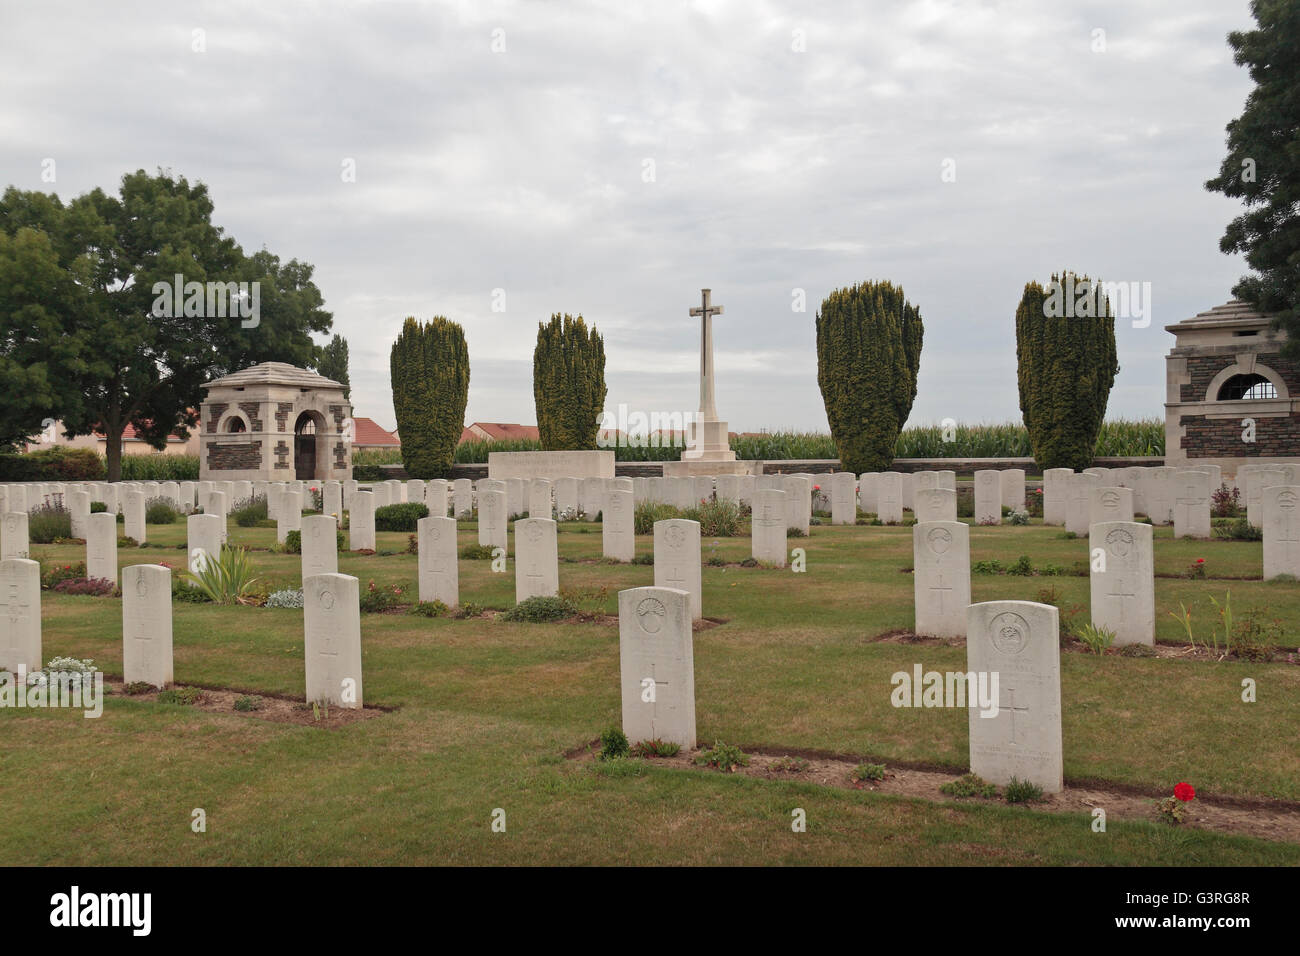 Cross of Sacrifice and rows of headstones in the CWGC Woburn Abbey Cemetery, Cuinchy, Pas de Calais, France. Stock Photo